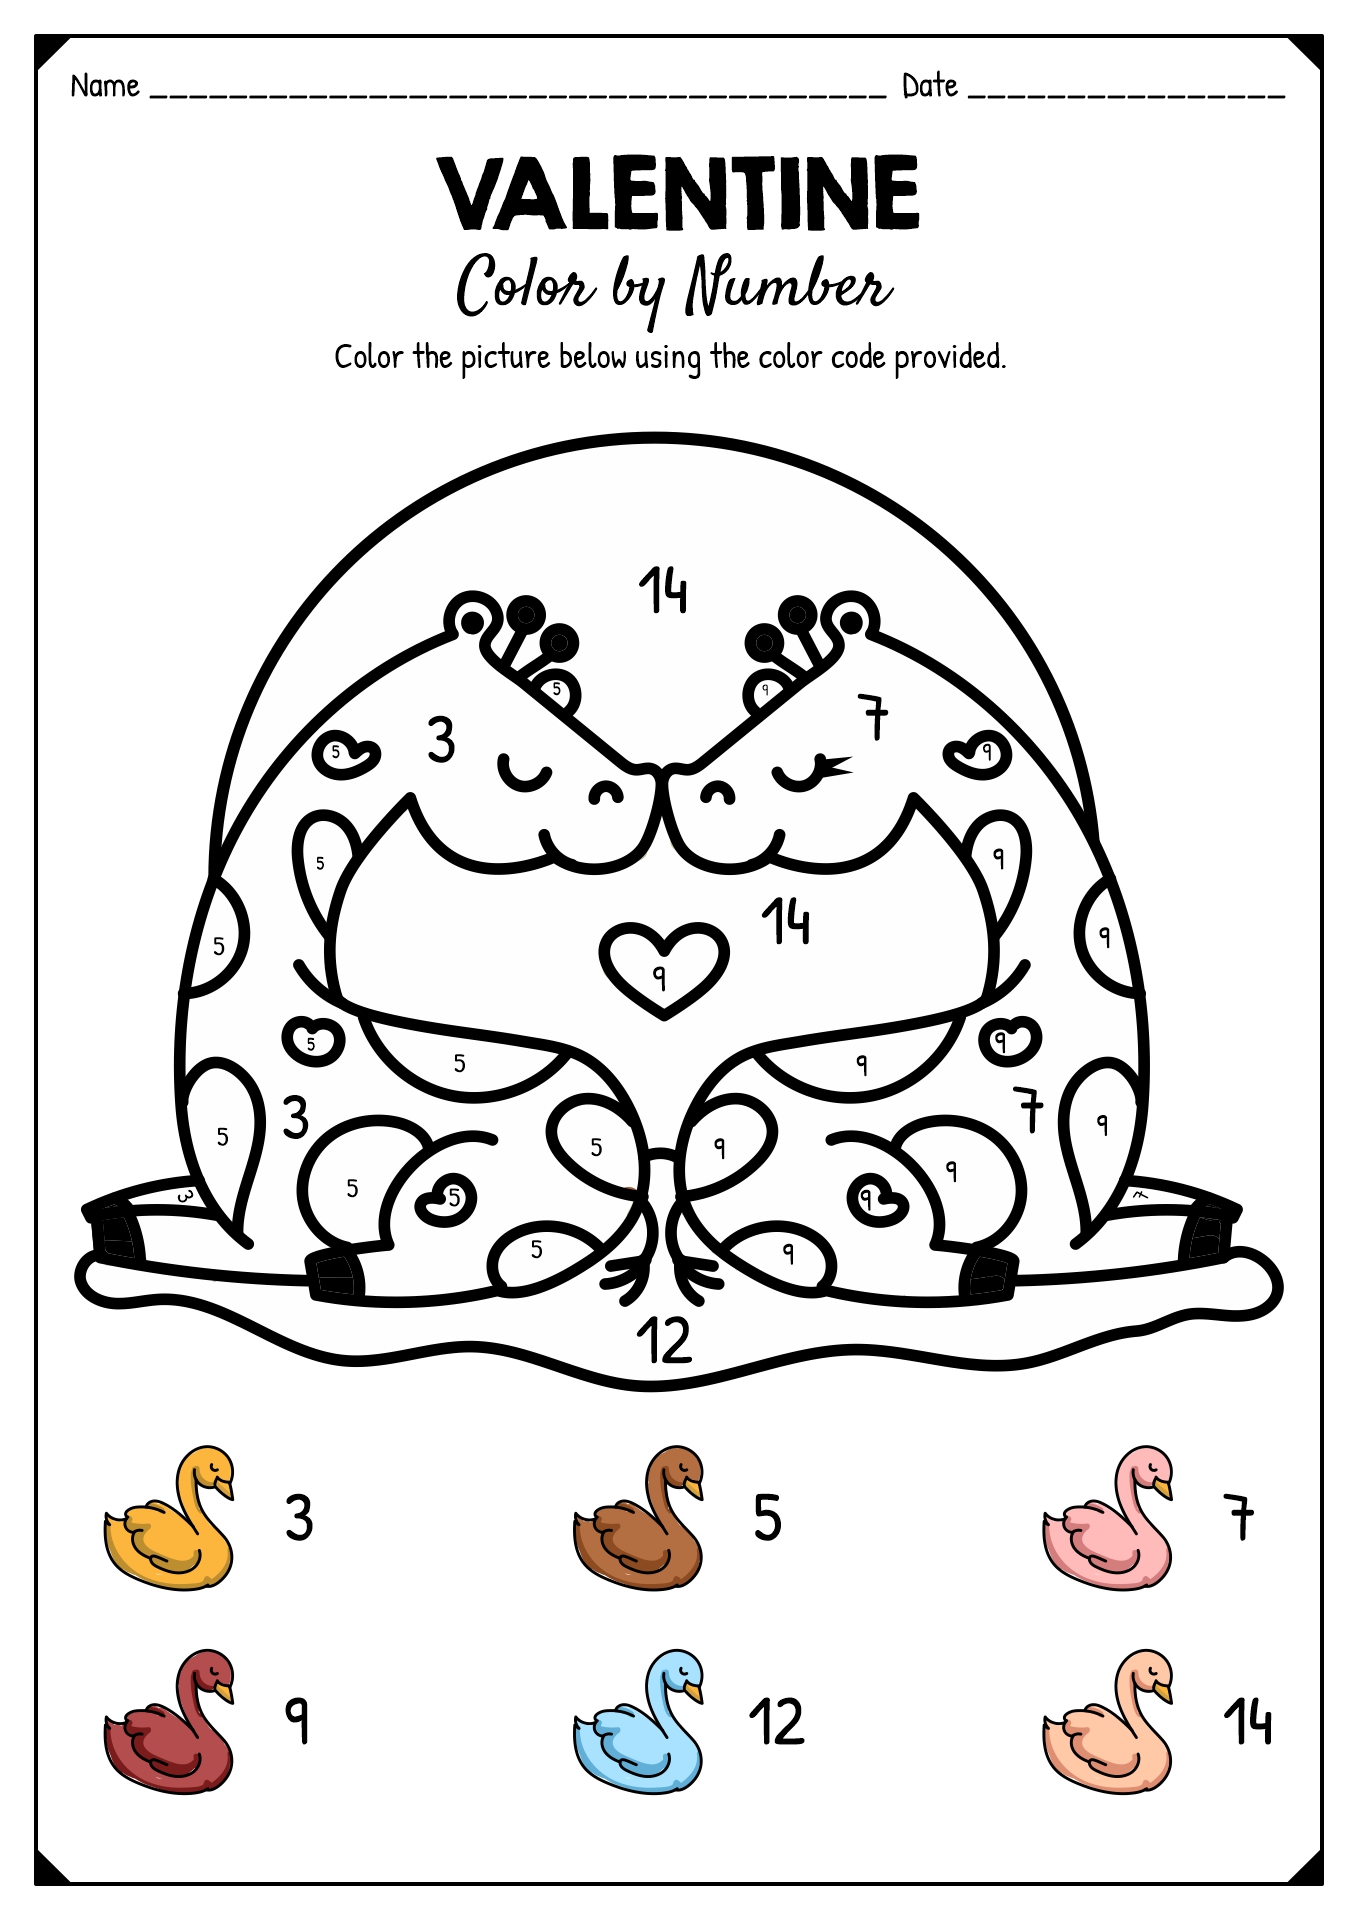 Valentine Color by Number Coloring Pages